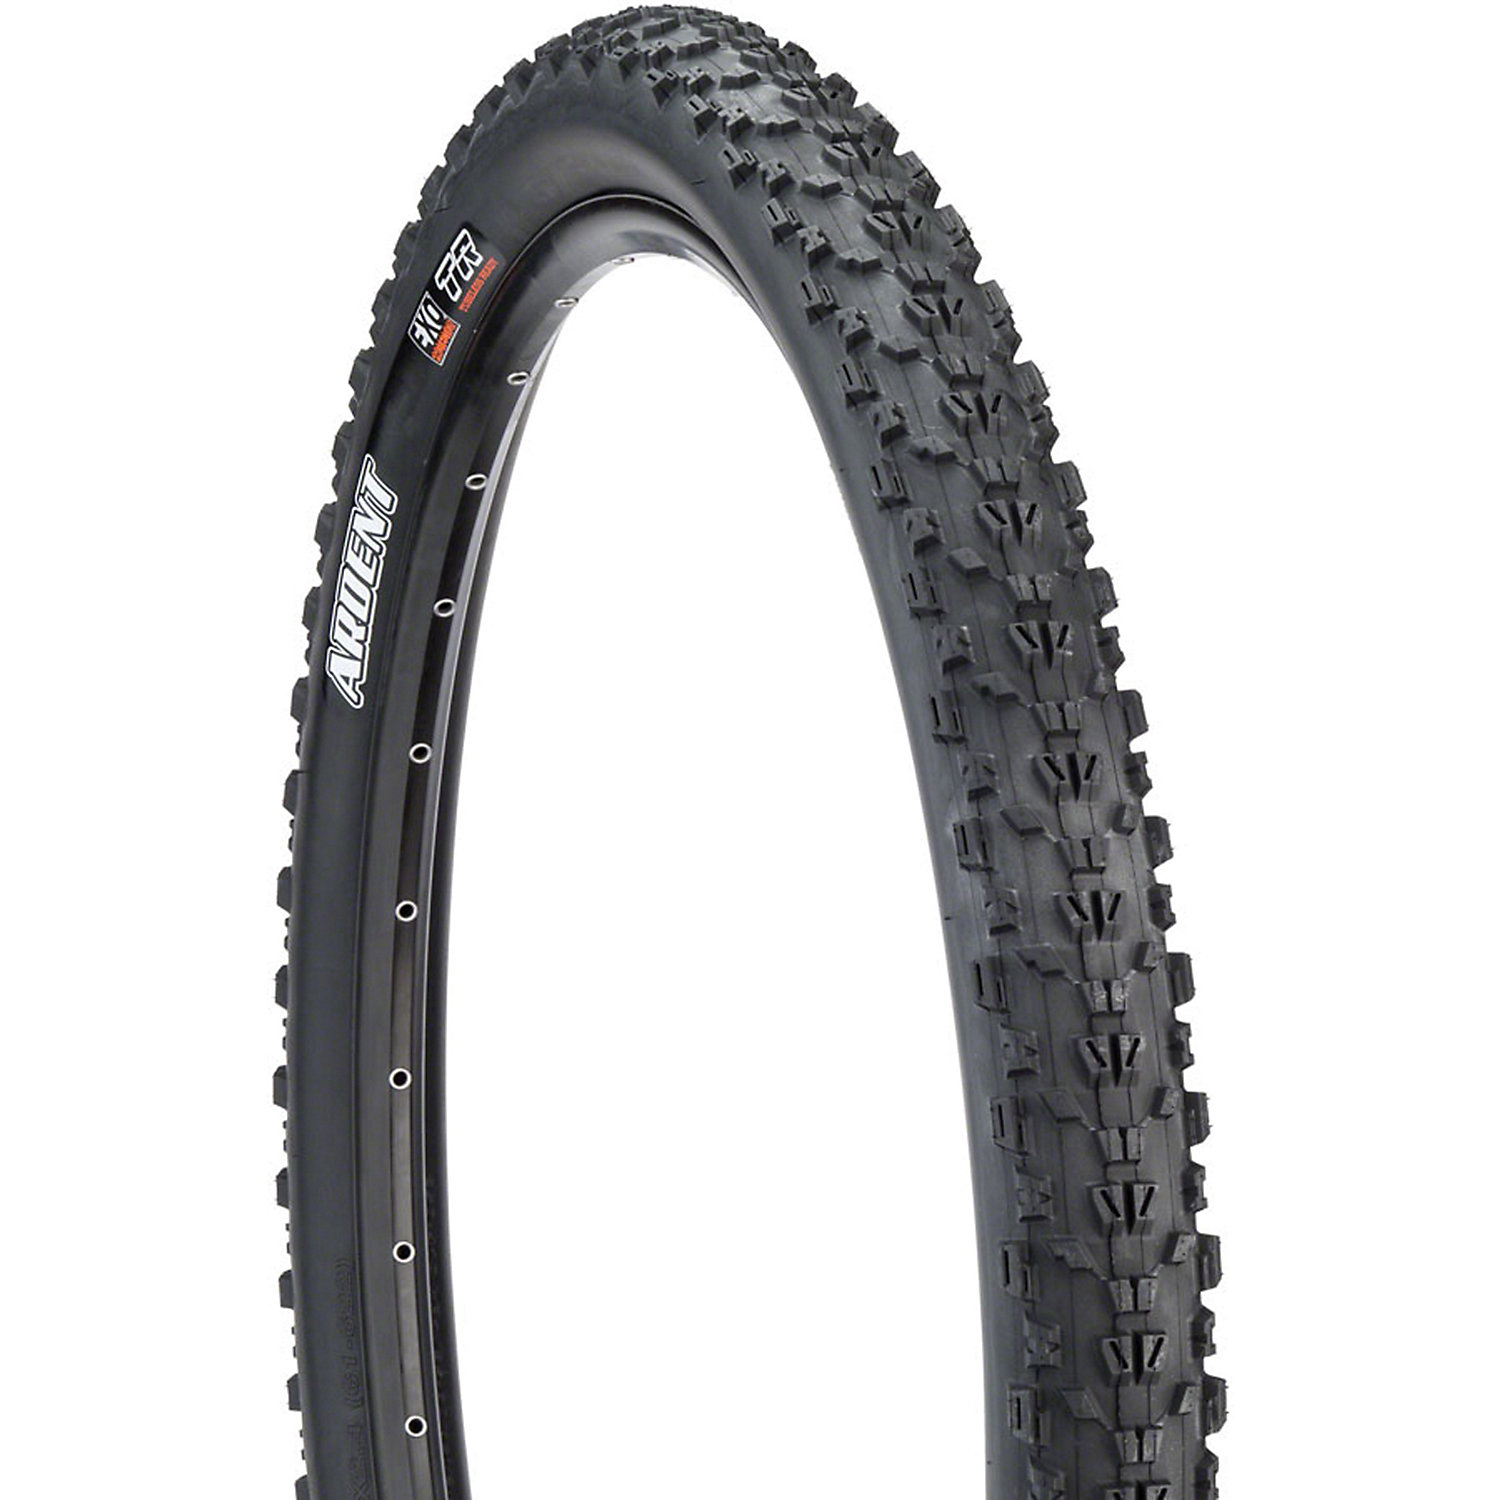 Maxxis Ardent 27.5 Tire